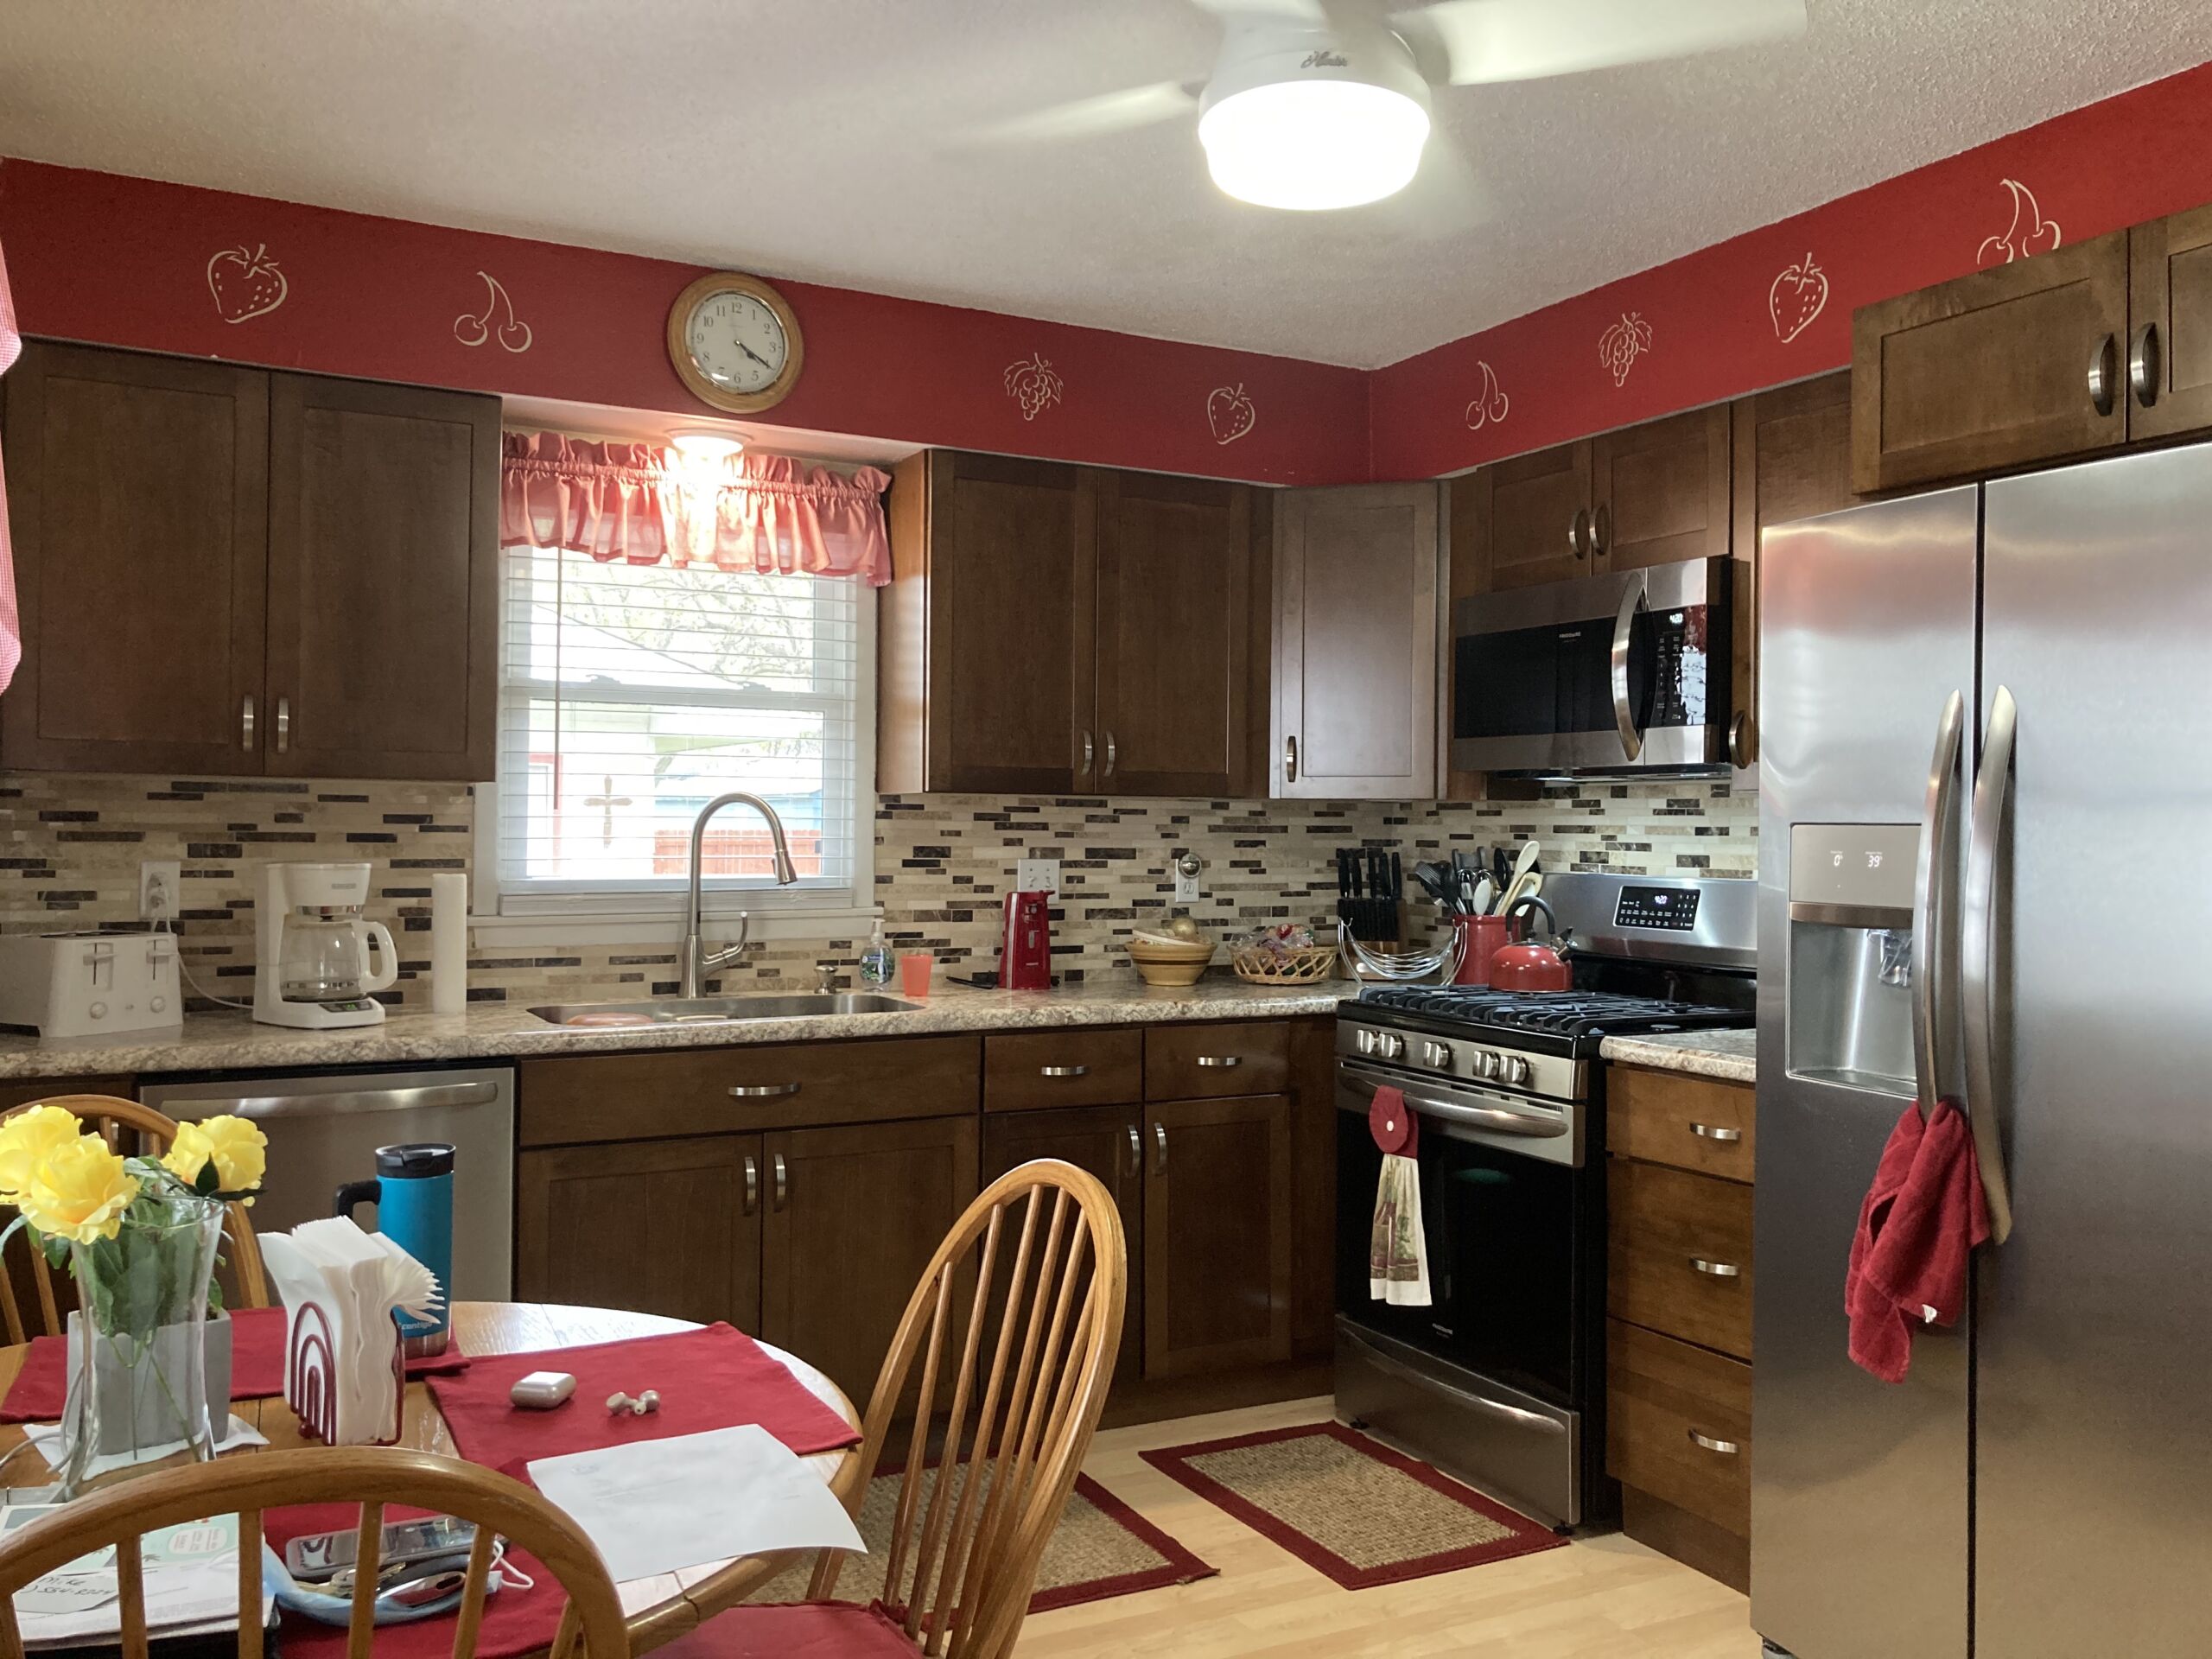 Updated kitchen with new countertops, cabinet and fridge